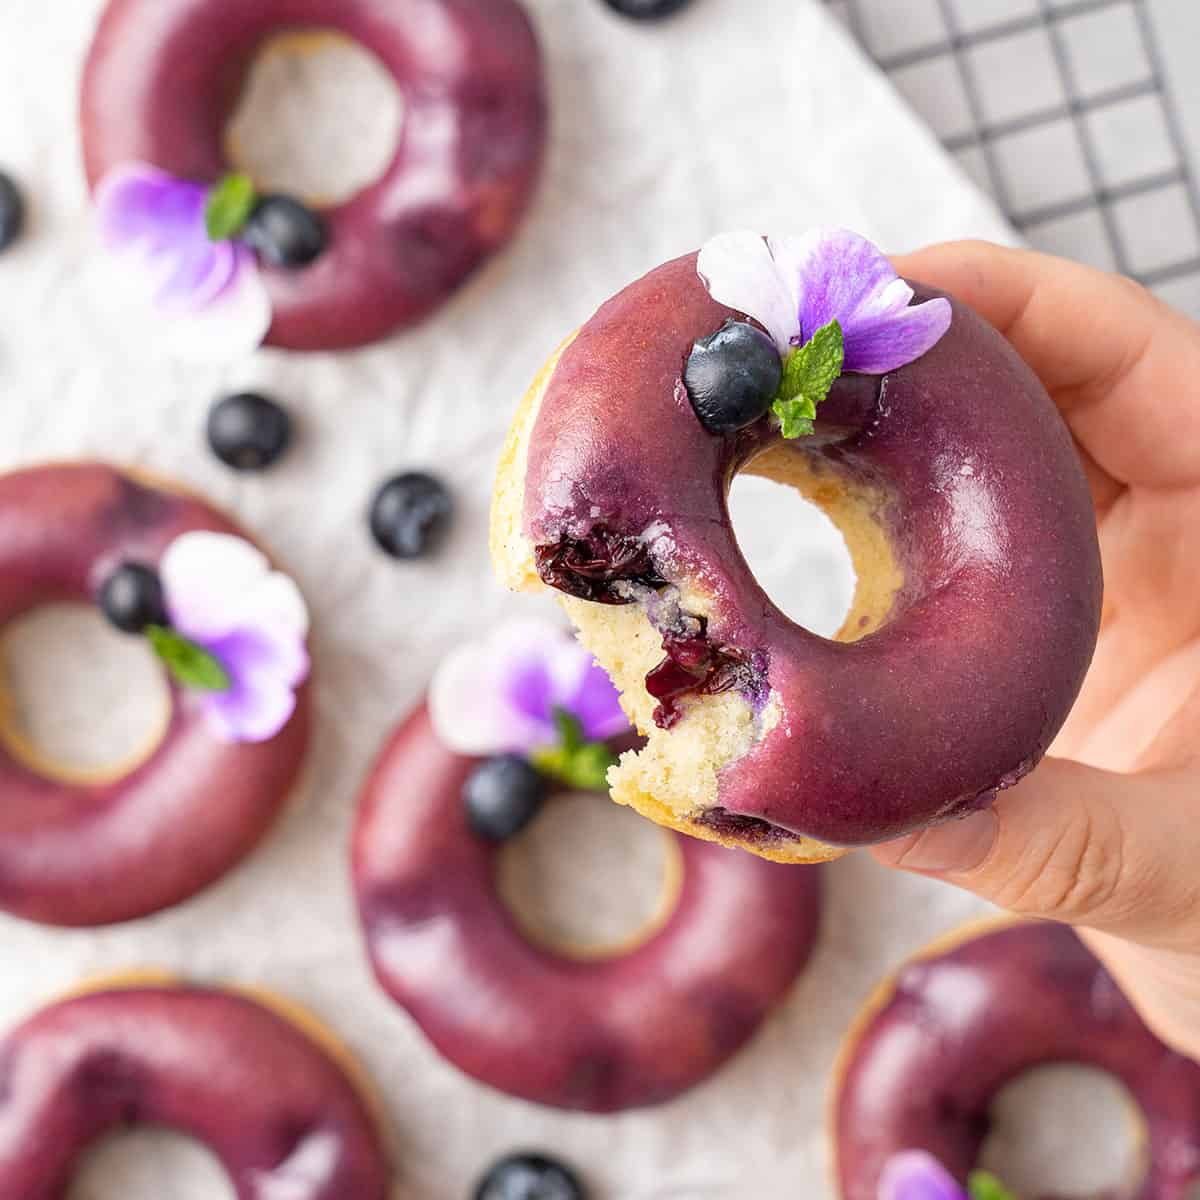 Blueberry baked donuts